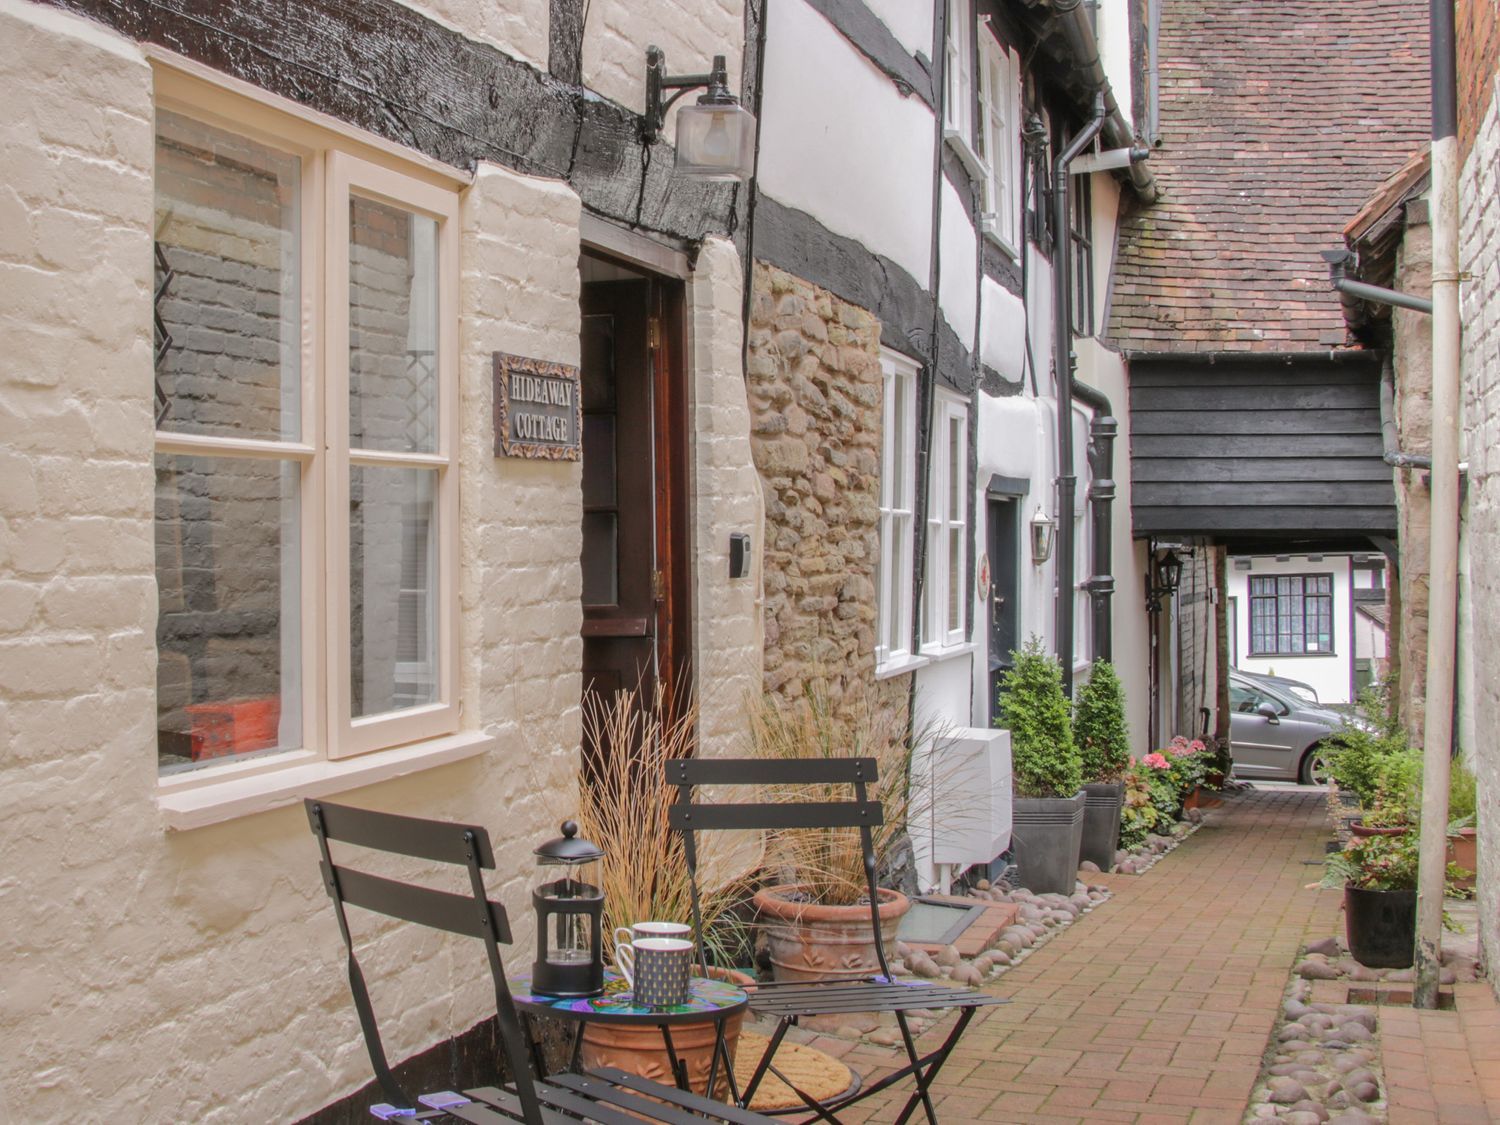 Hideaway Cottage, Ludlow | sykescottages.co.uk